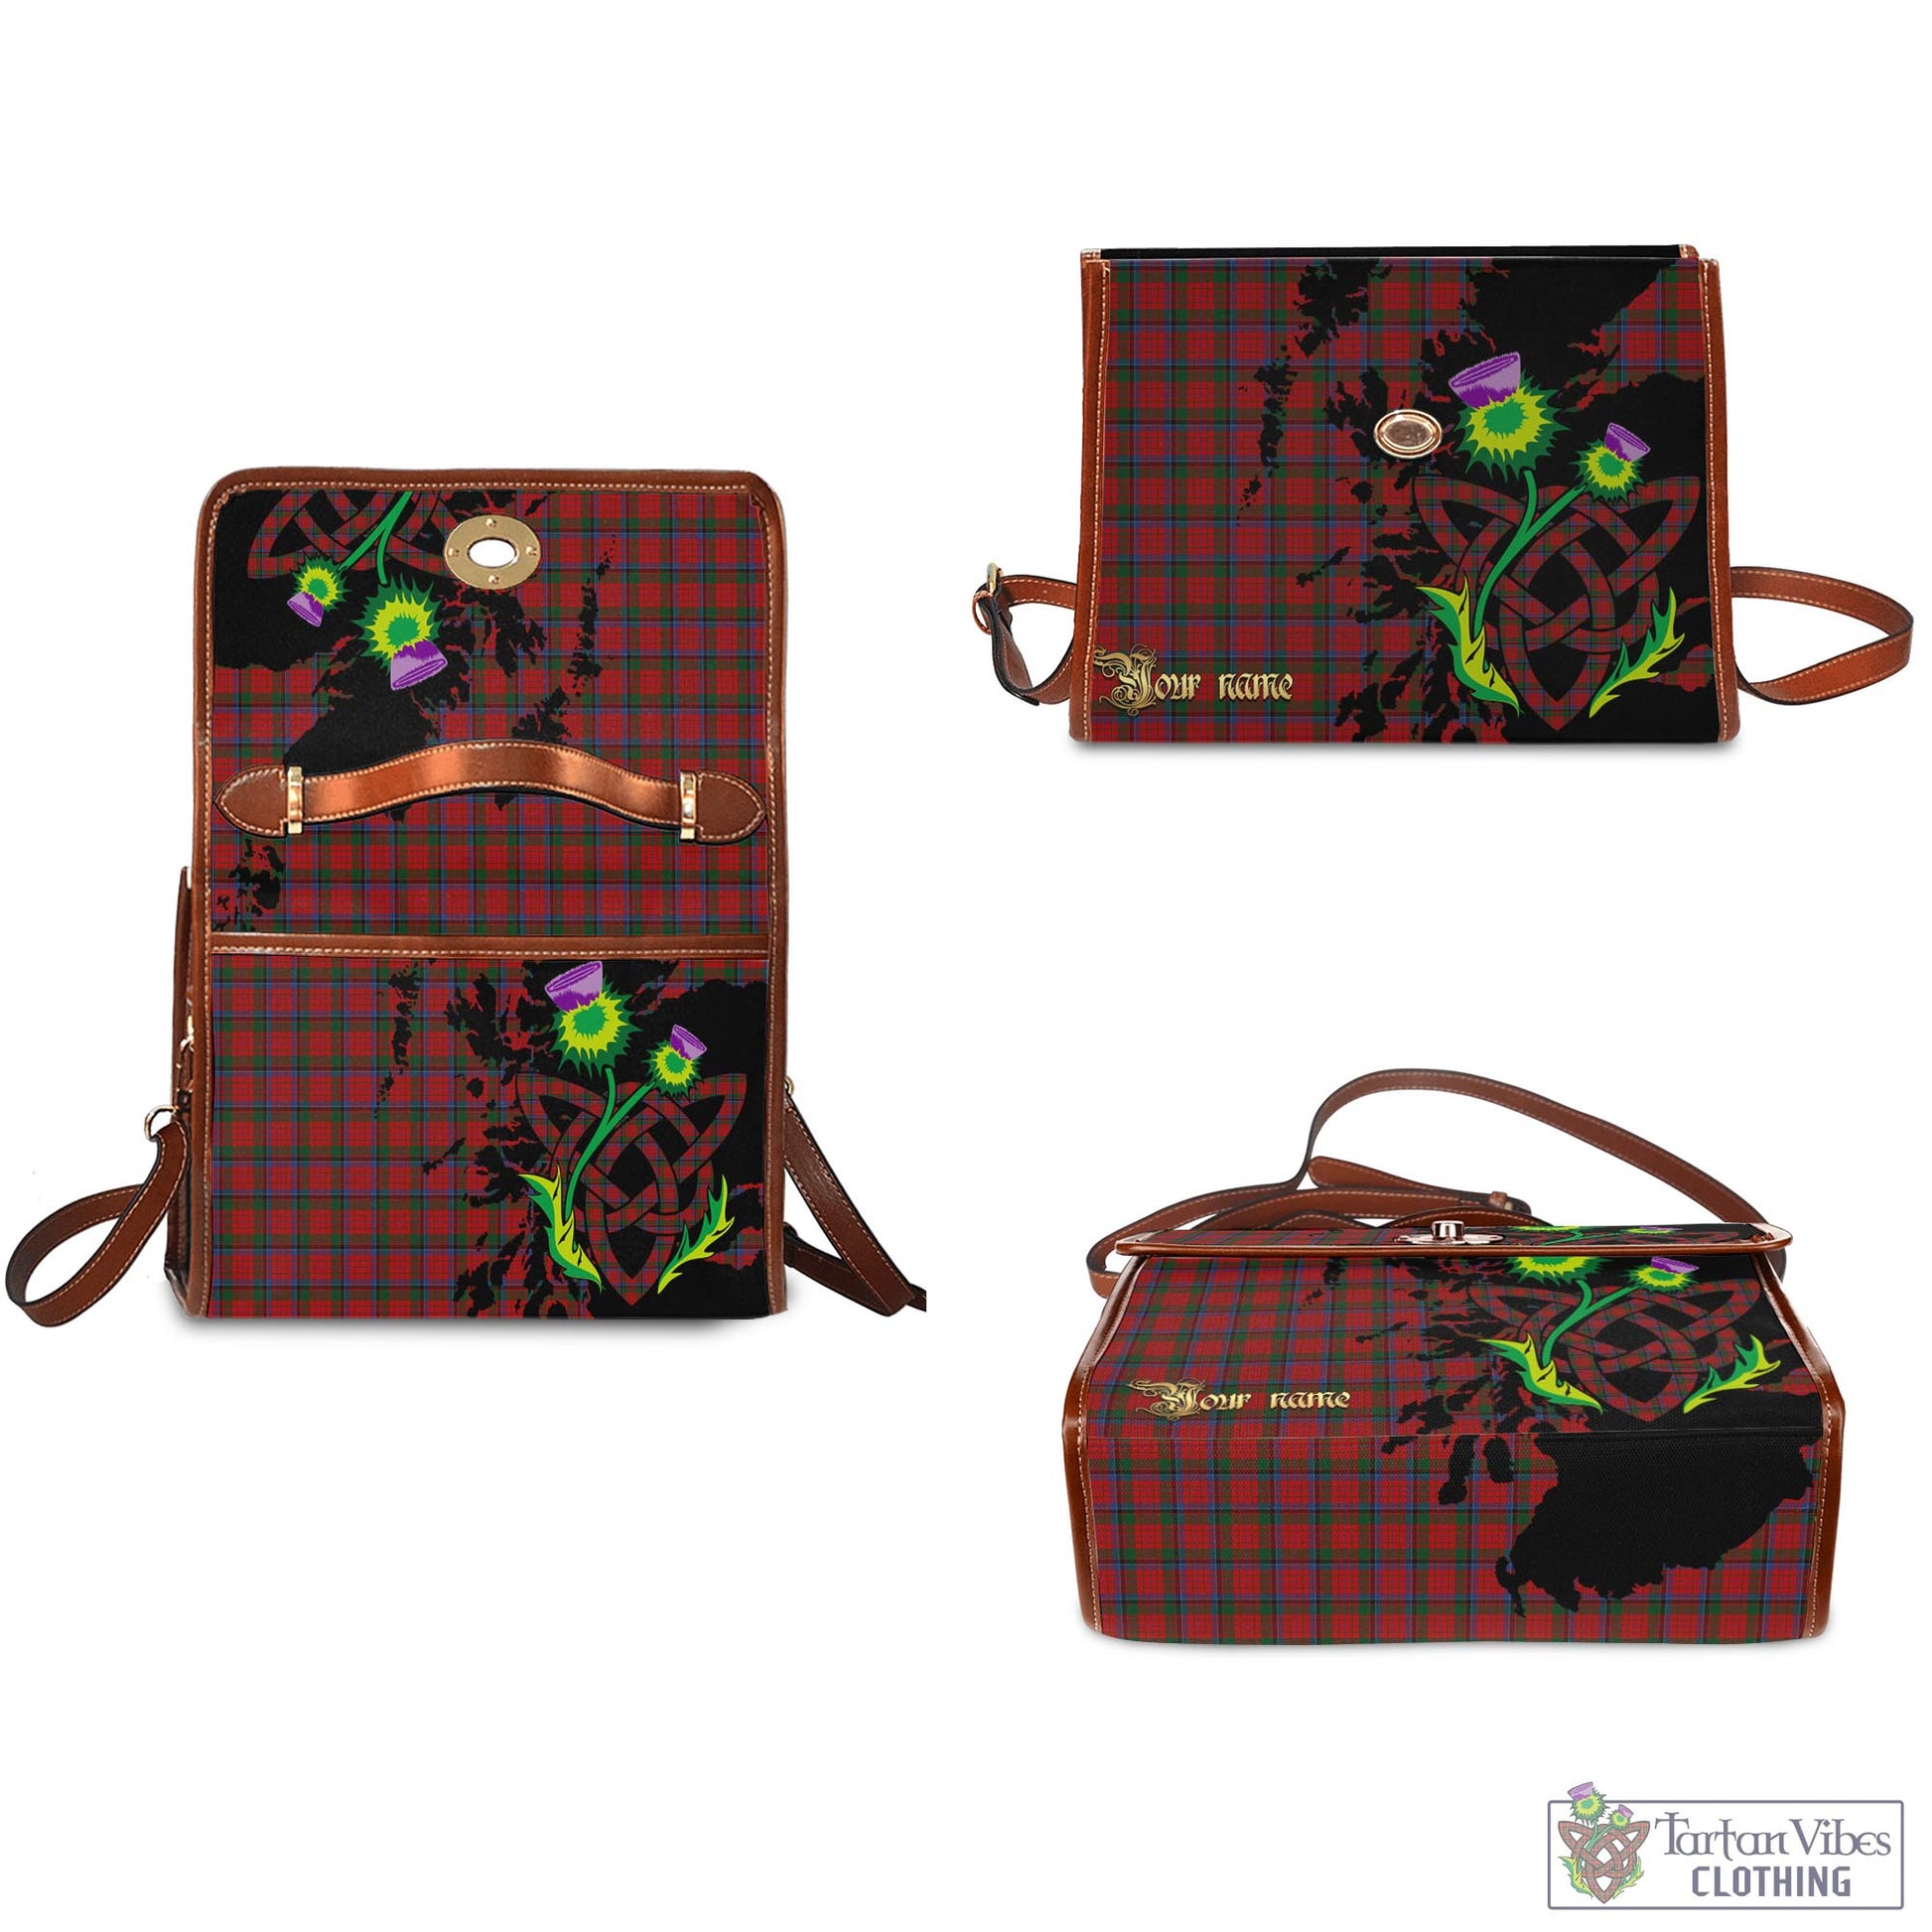 Tartan Vibes Clothing Nicolson Tartan Waterproof Canvas Bag with Scotland Map and Thistle Celtic Accents